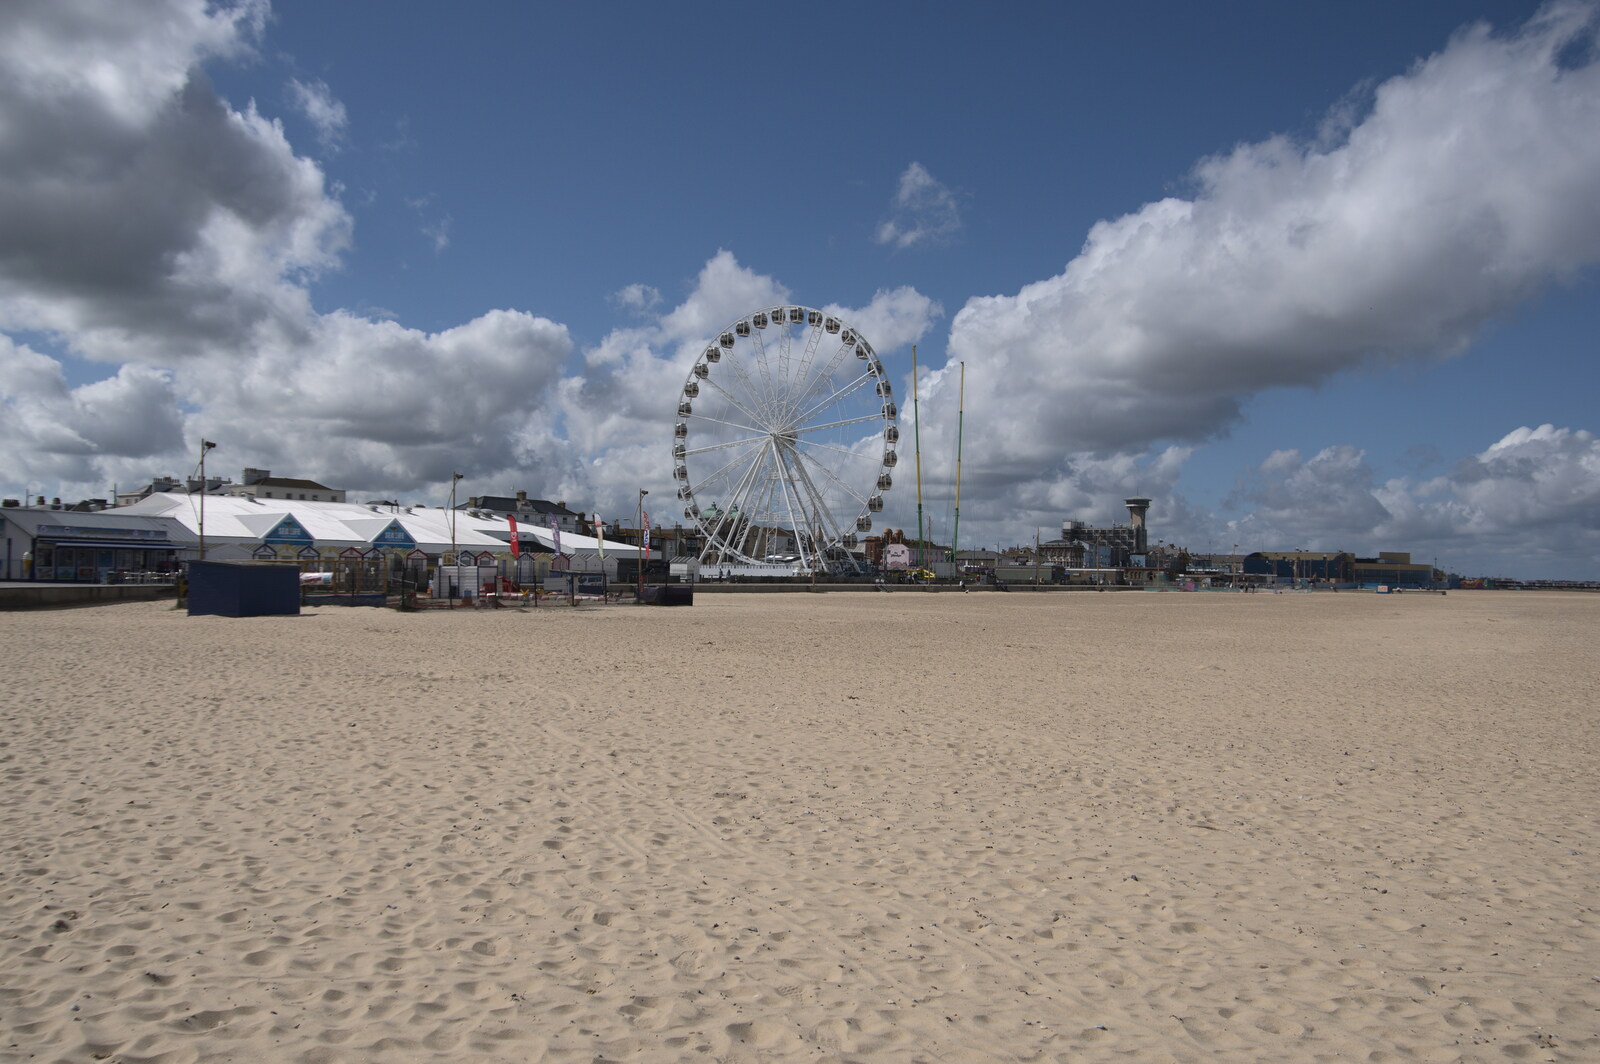 Looking back to the 'strip' from Faded Seaside Glamour: A Weekend in Great Yarmouth, Norfolk - 29th May 2022